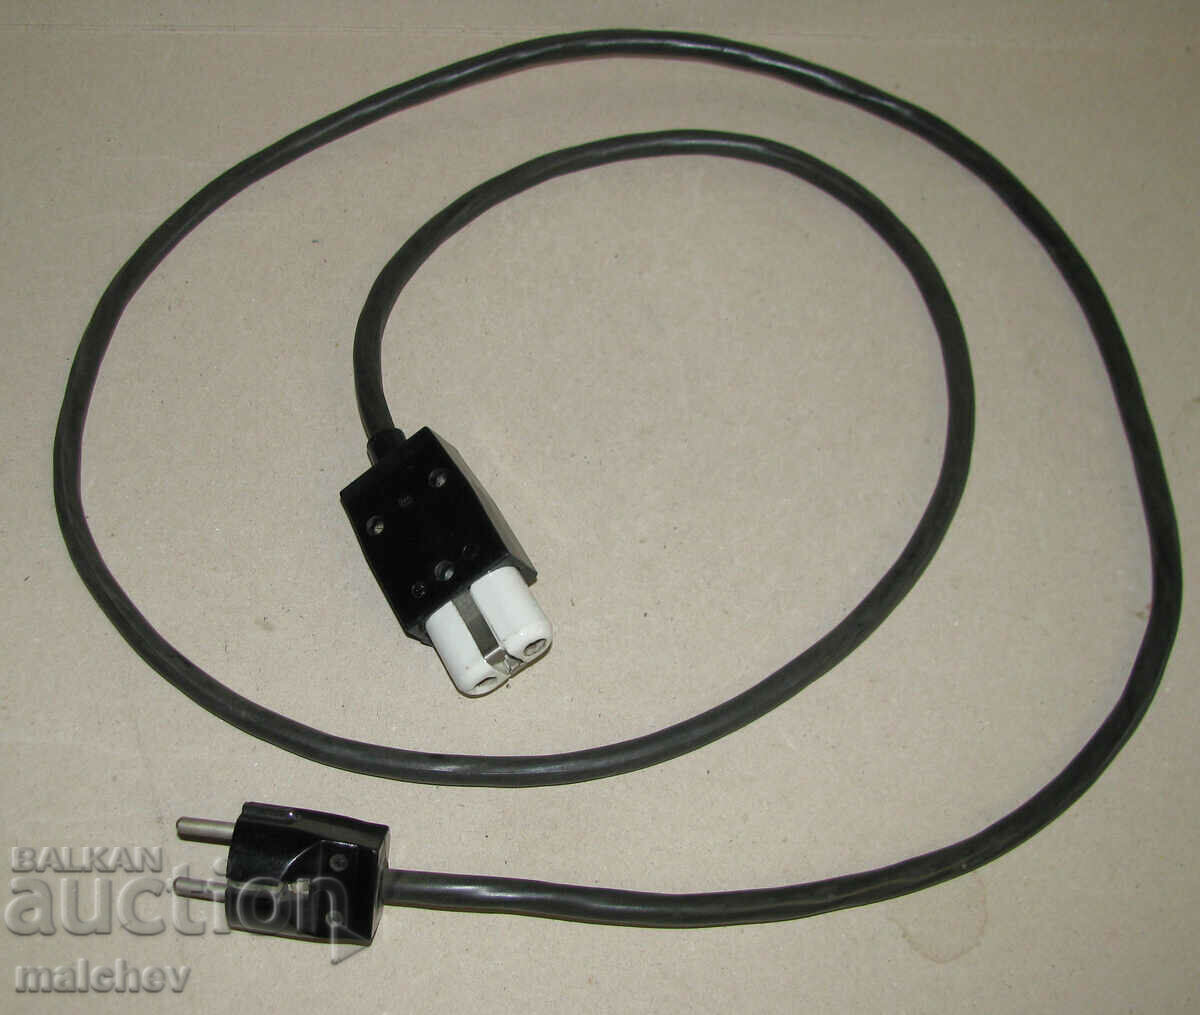 1.8 m extension cable with a plug for pepper stoves preserved